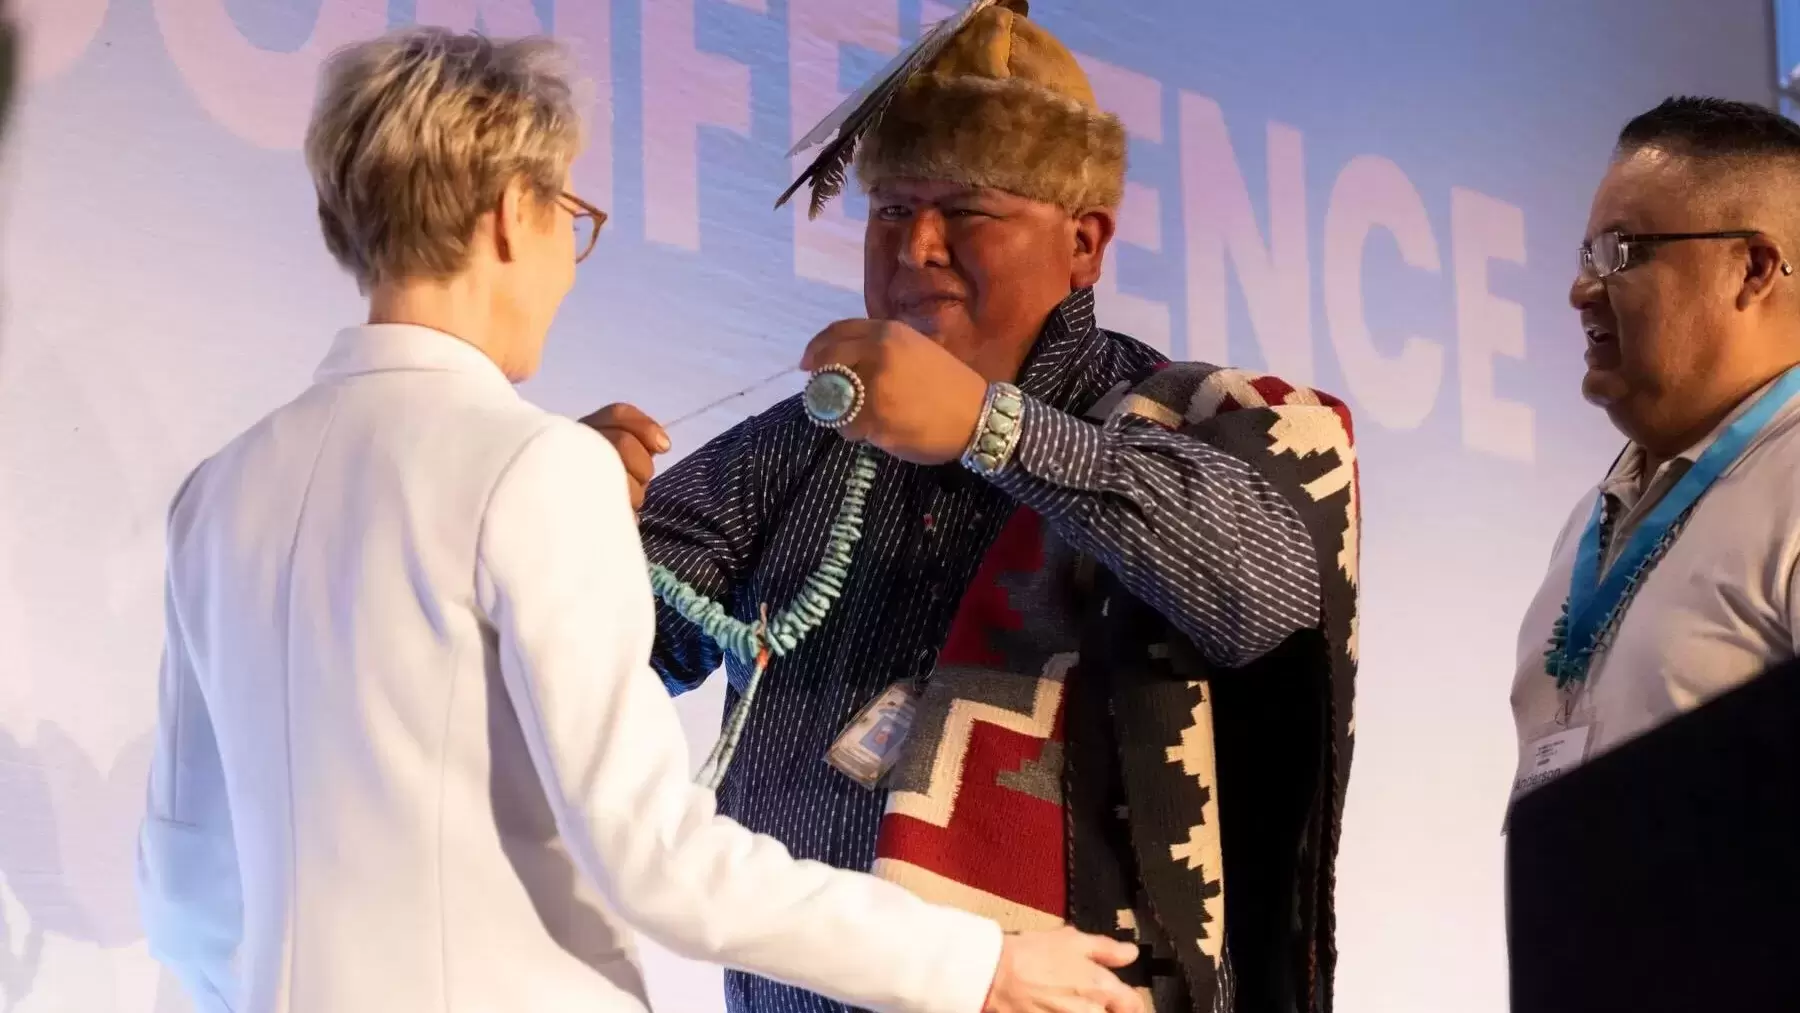 Mental Health America CEO and President Schroeder Stribling is presented with a necklace by medicine man Aaron D. Sam on conference stage. 